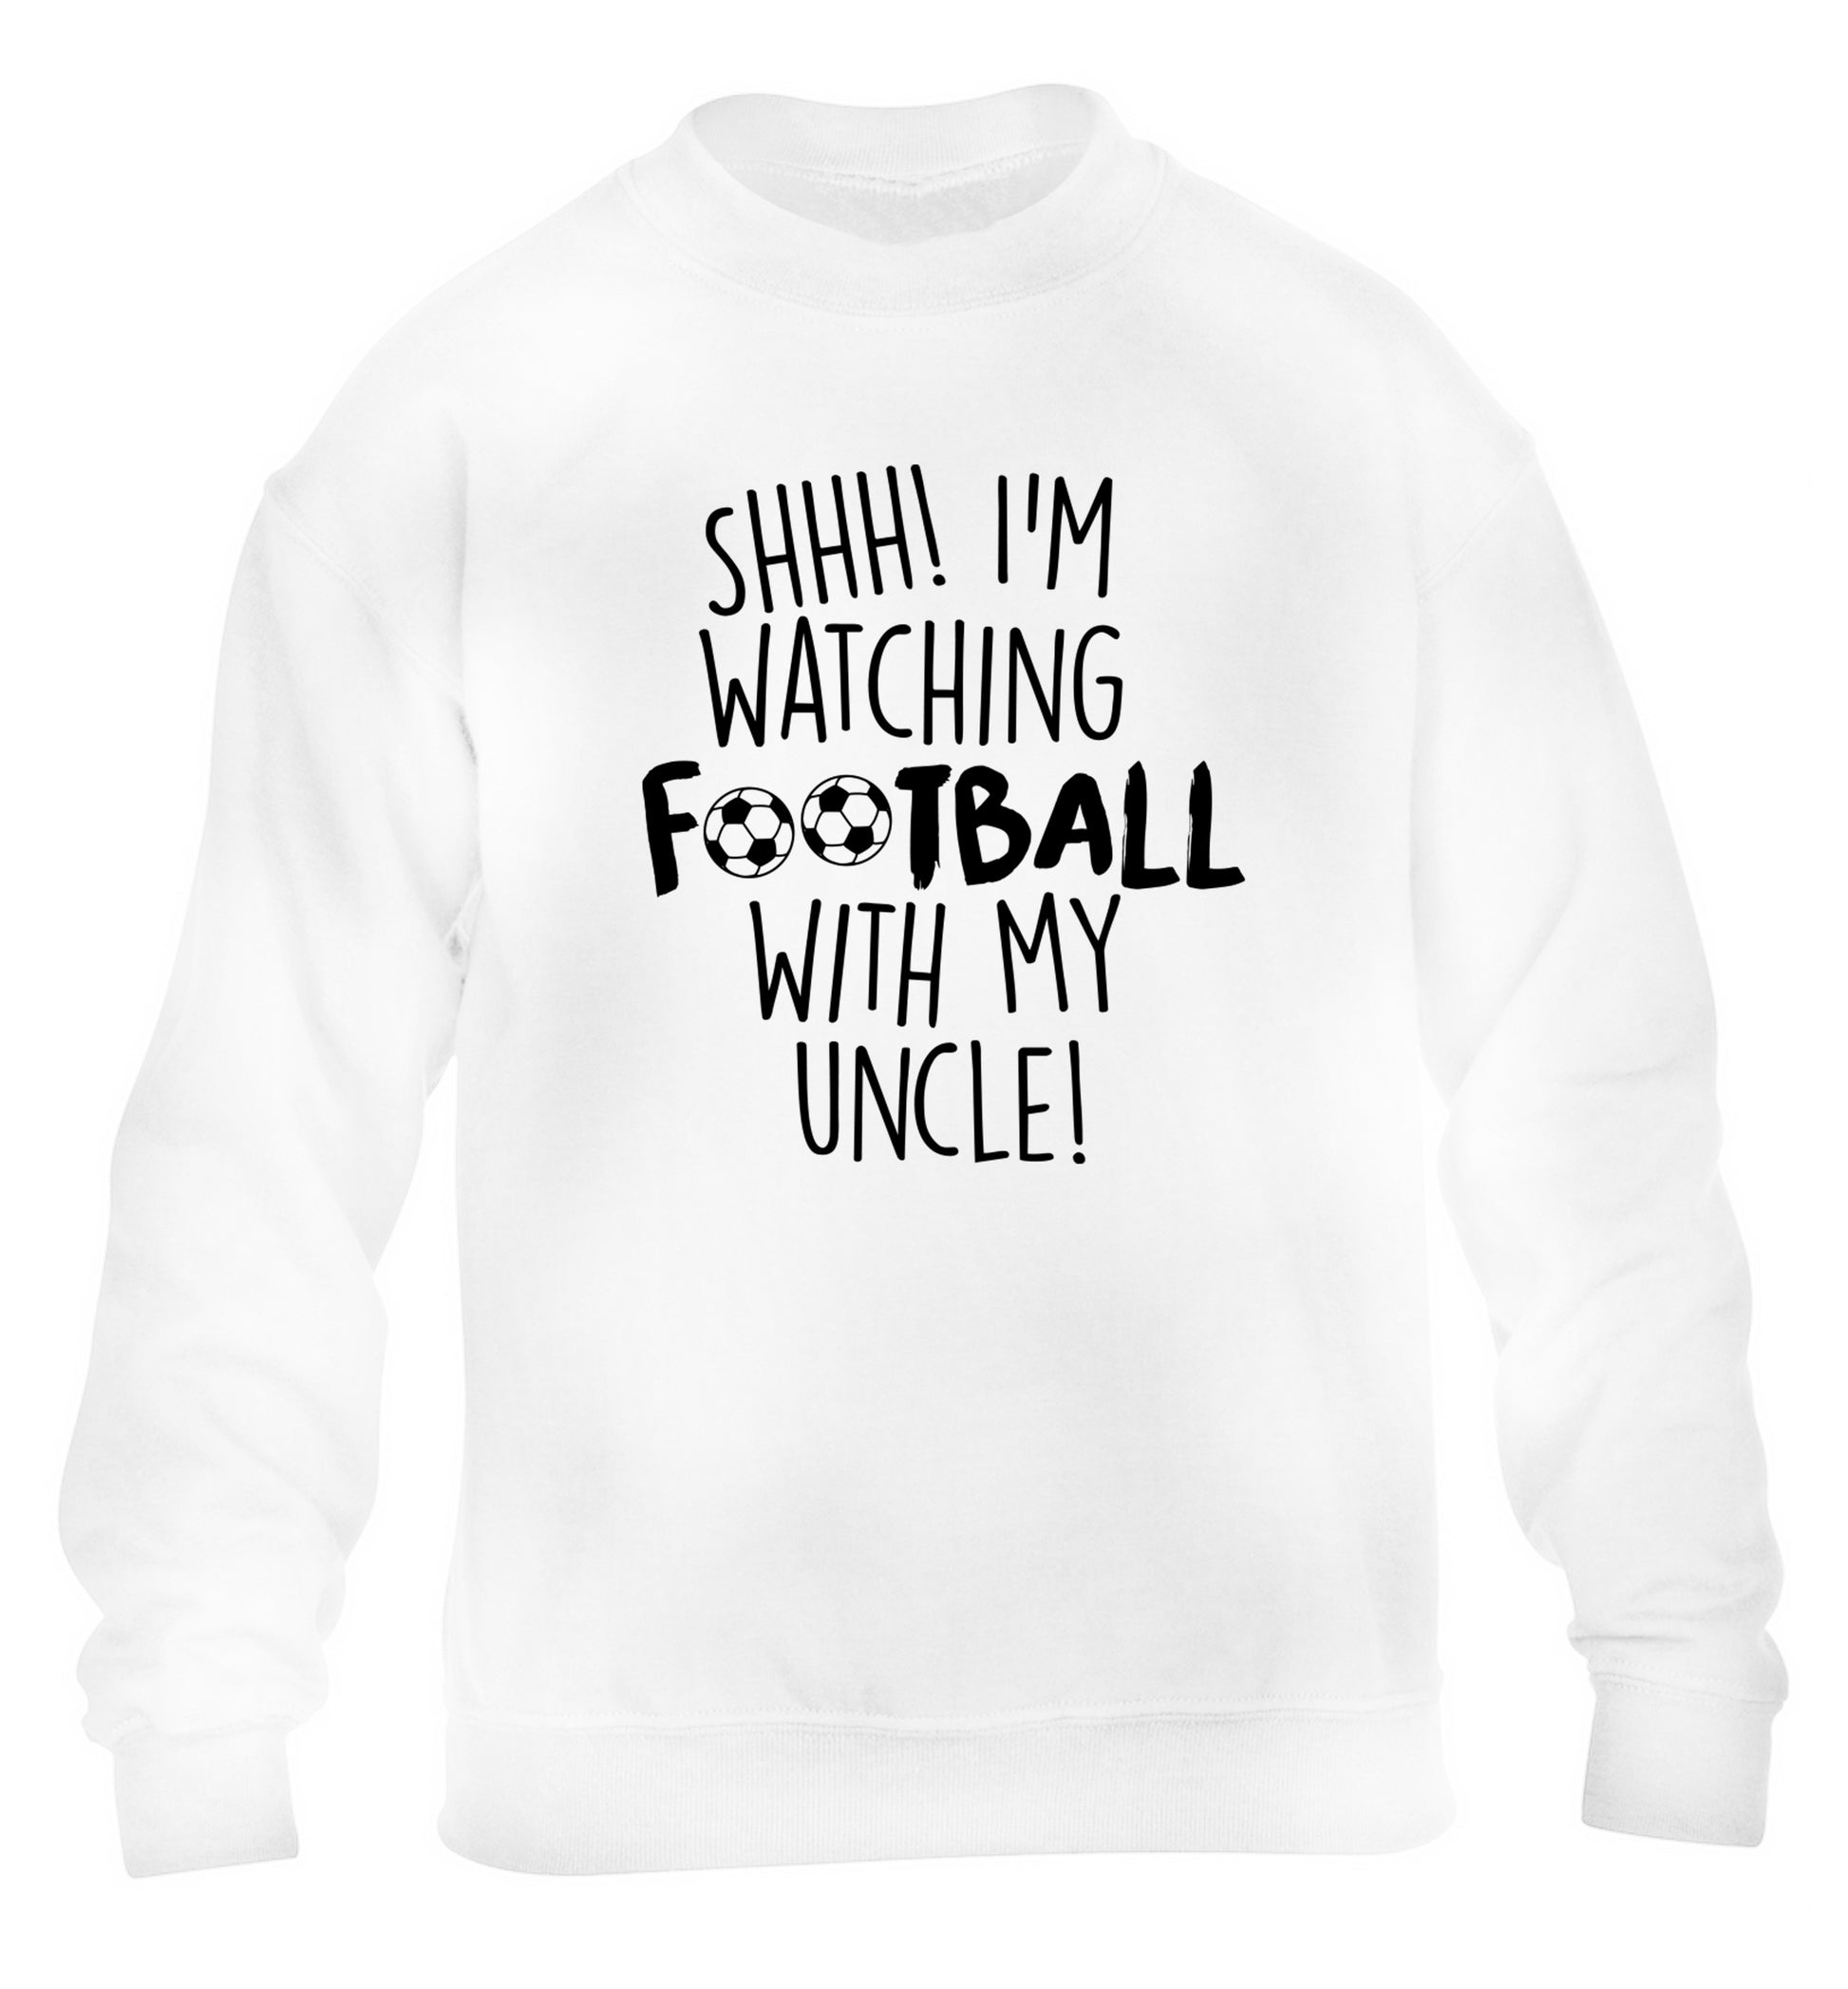 Shhh I'm watching football with my uncle children's white sweater 12-14 Years